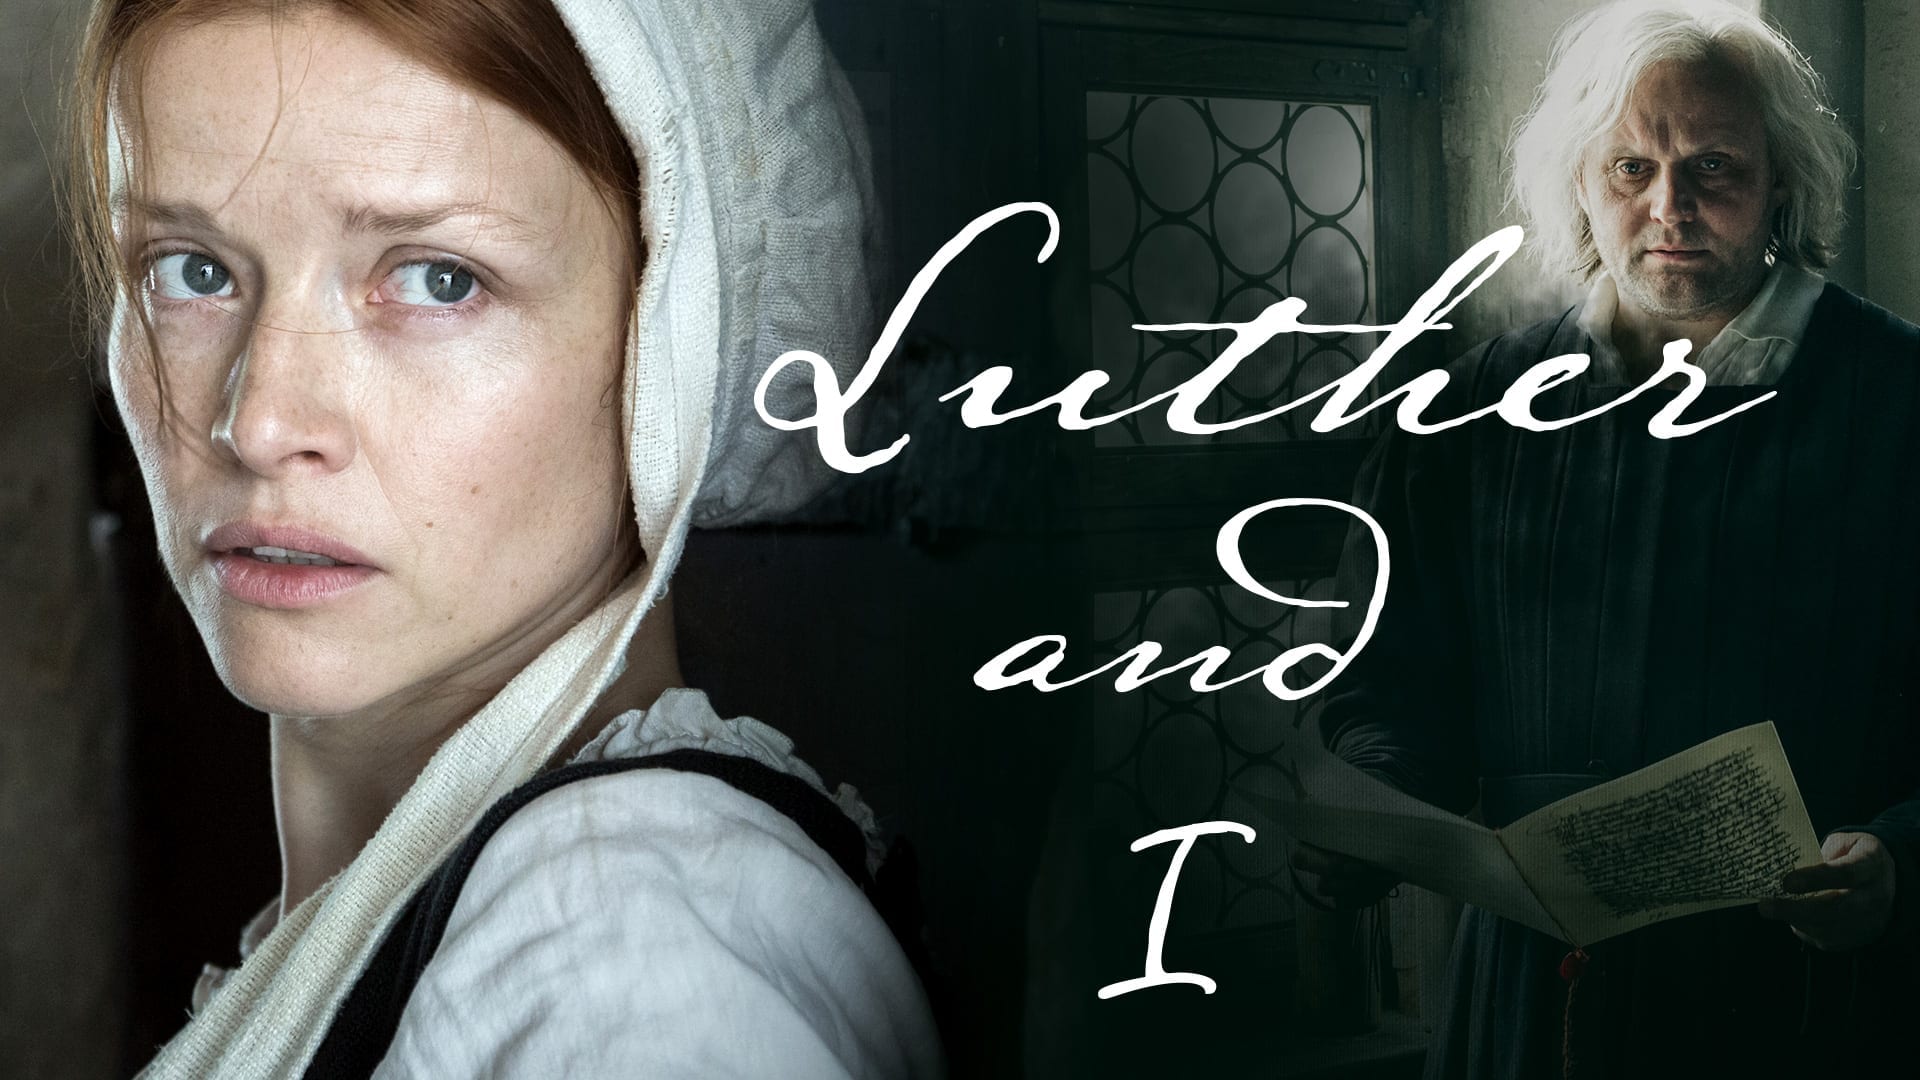 luther and i vimeo ott series banner 1920x1080 1